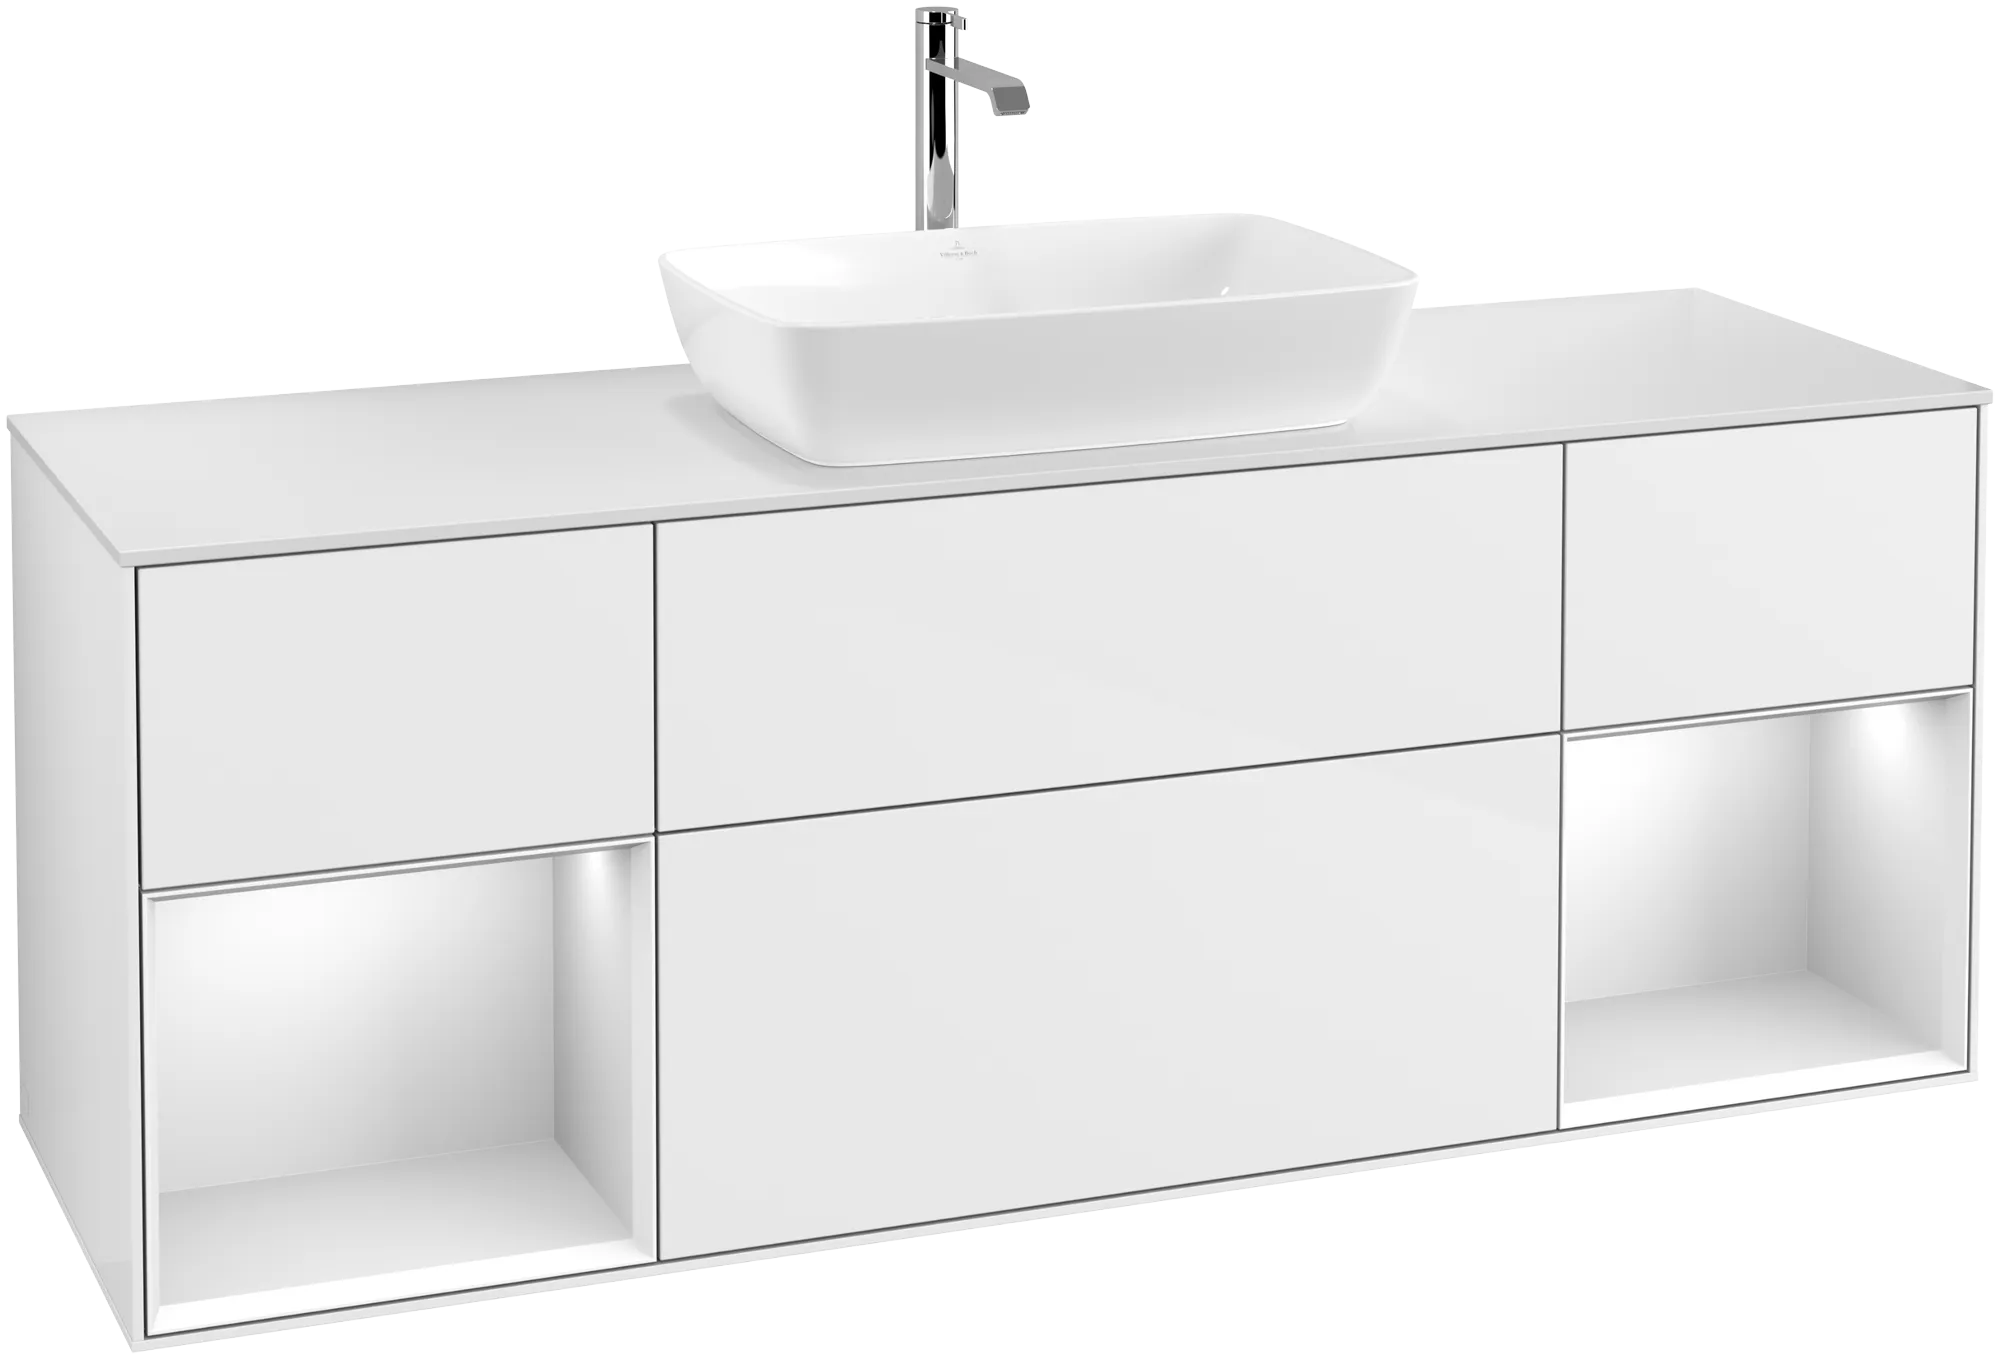 Зображення з  VILLEROY BOCH Finion Vanity unit, with lighting, 4 pull-out compartments, 1600 x 603 x 501 mm, Glossy White Lacquer / White Matt Lacquer / Glass White Matt #G861MTGF